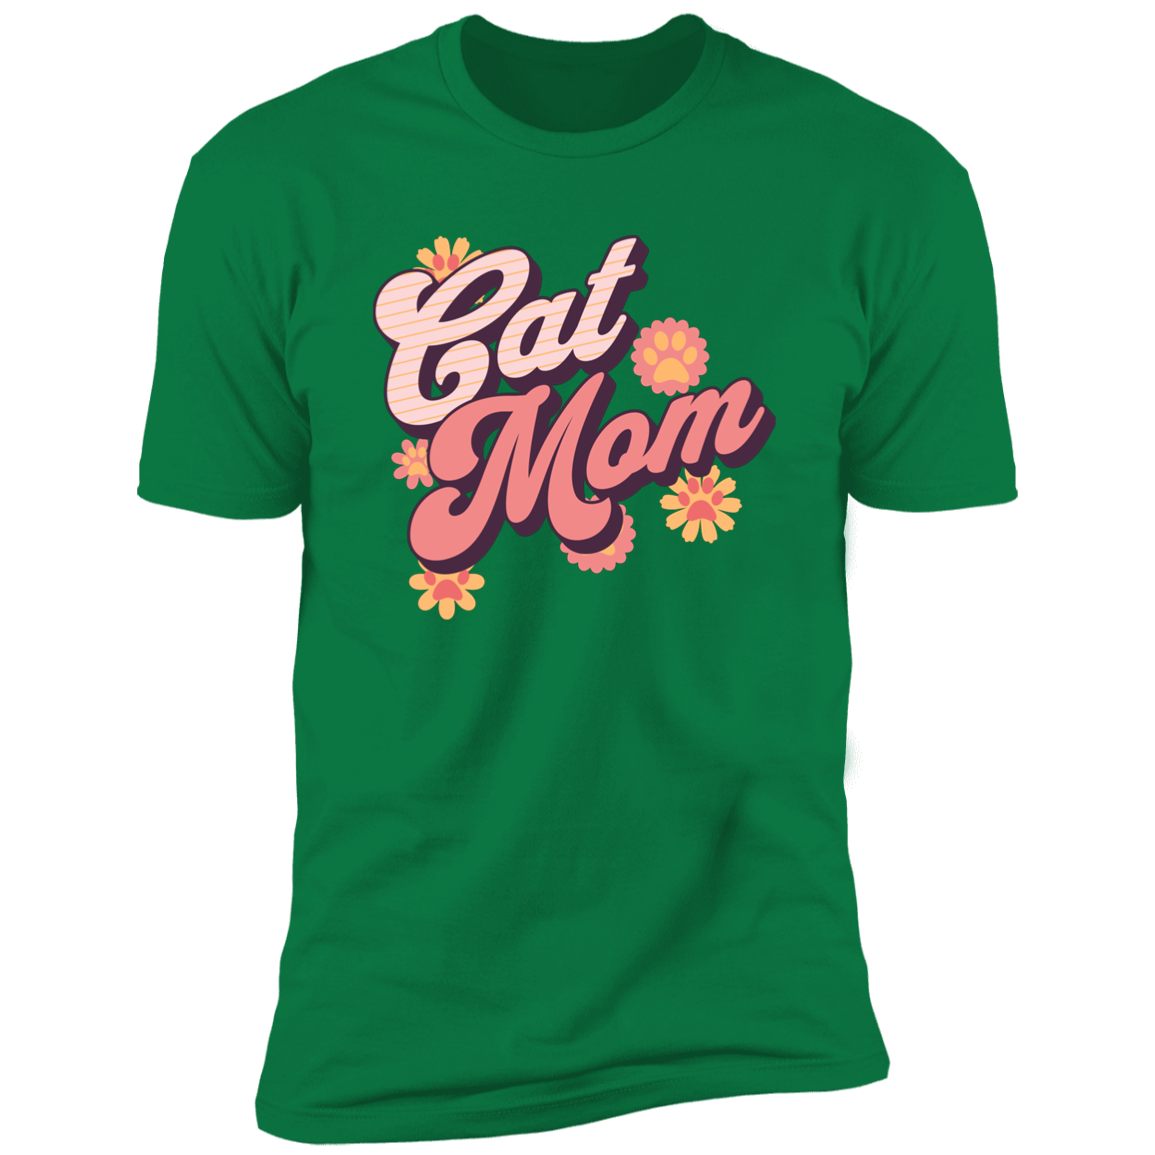 Cat Mom Retro T-shirt, Cat Mom Shirt for humans, in kelly green